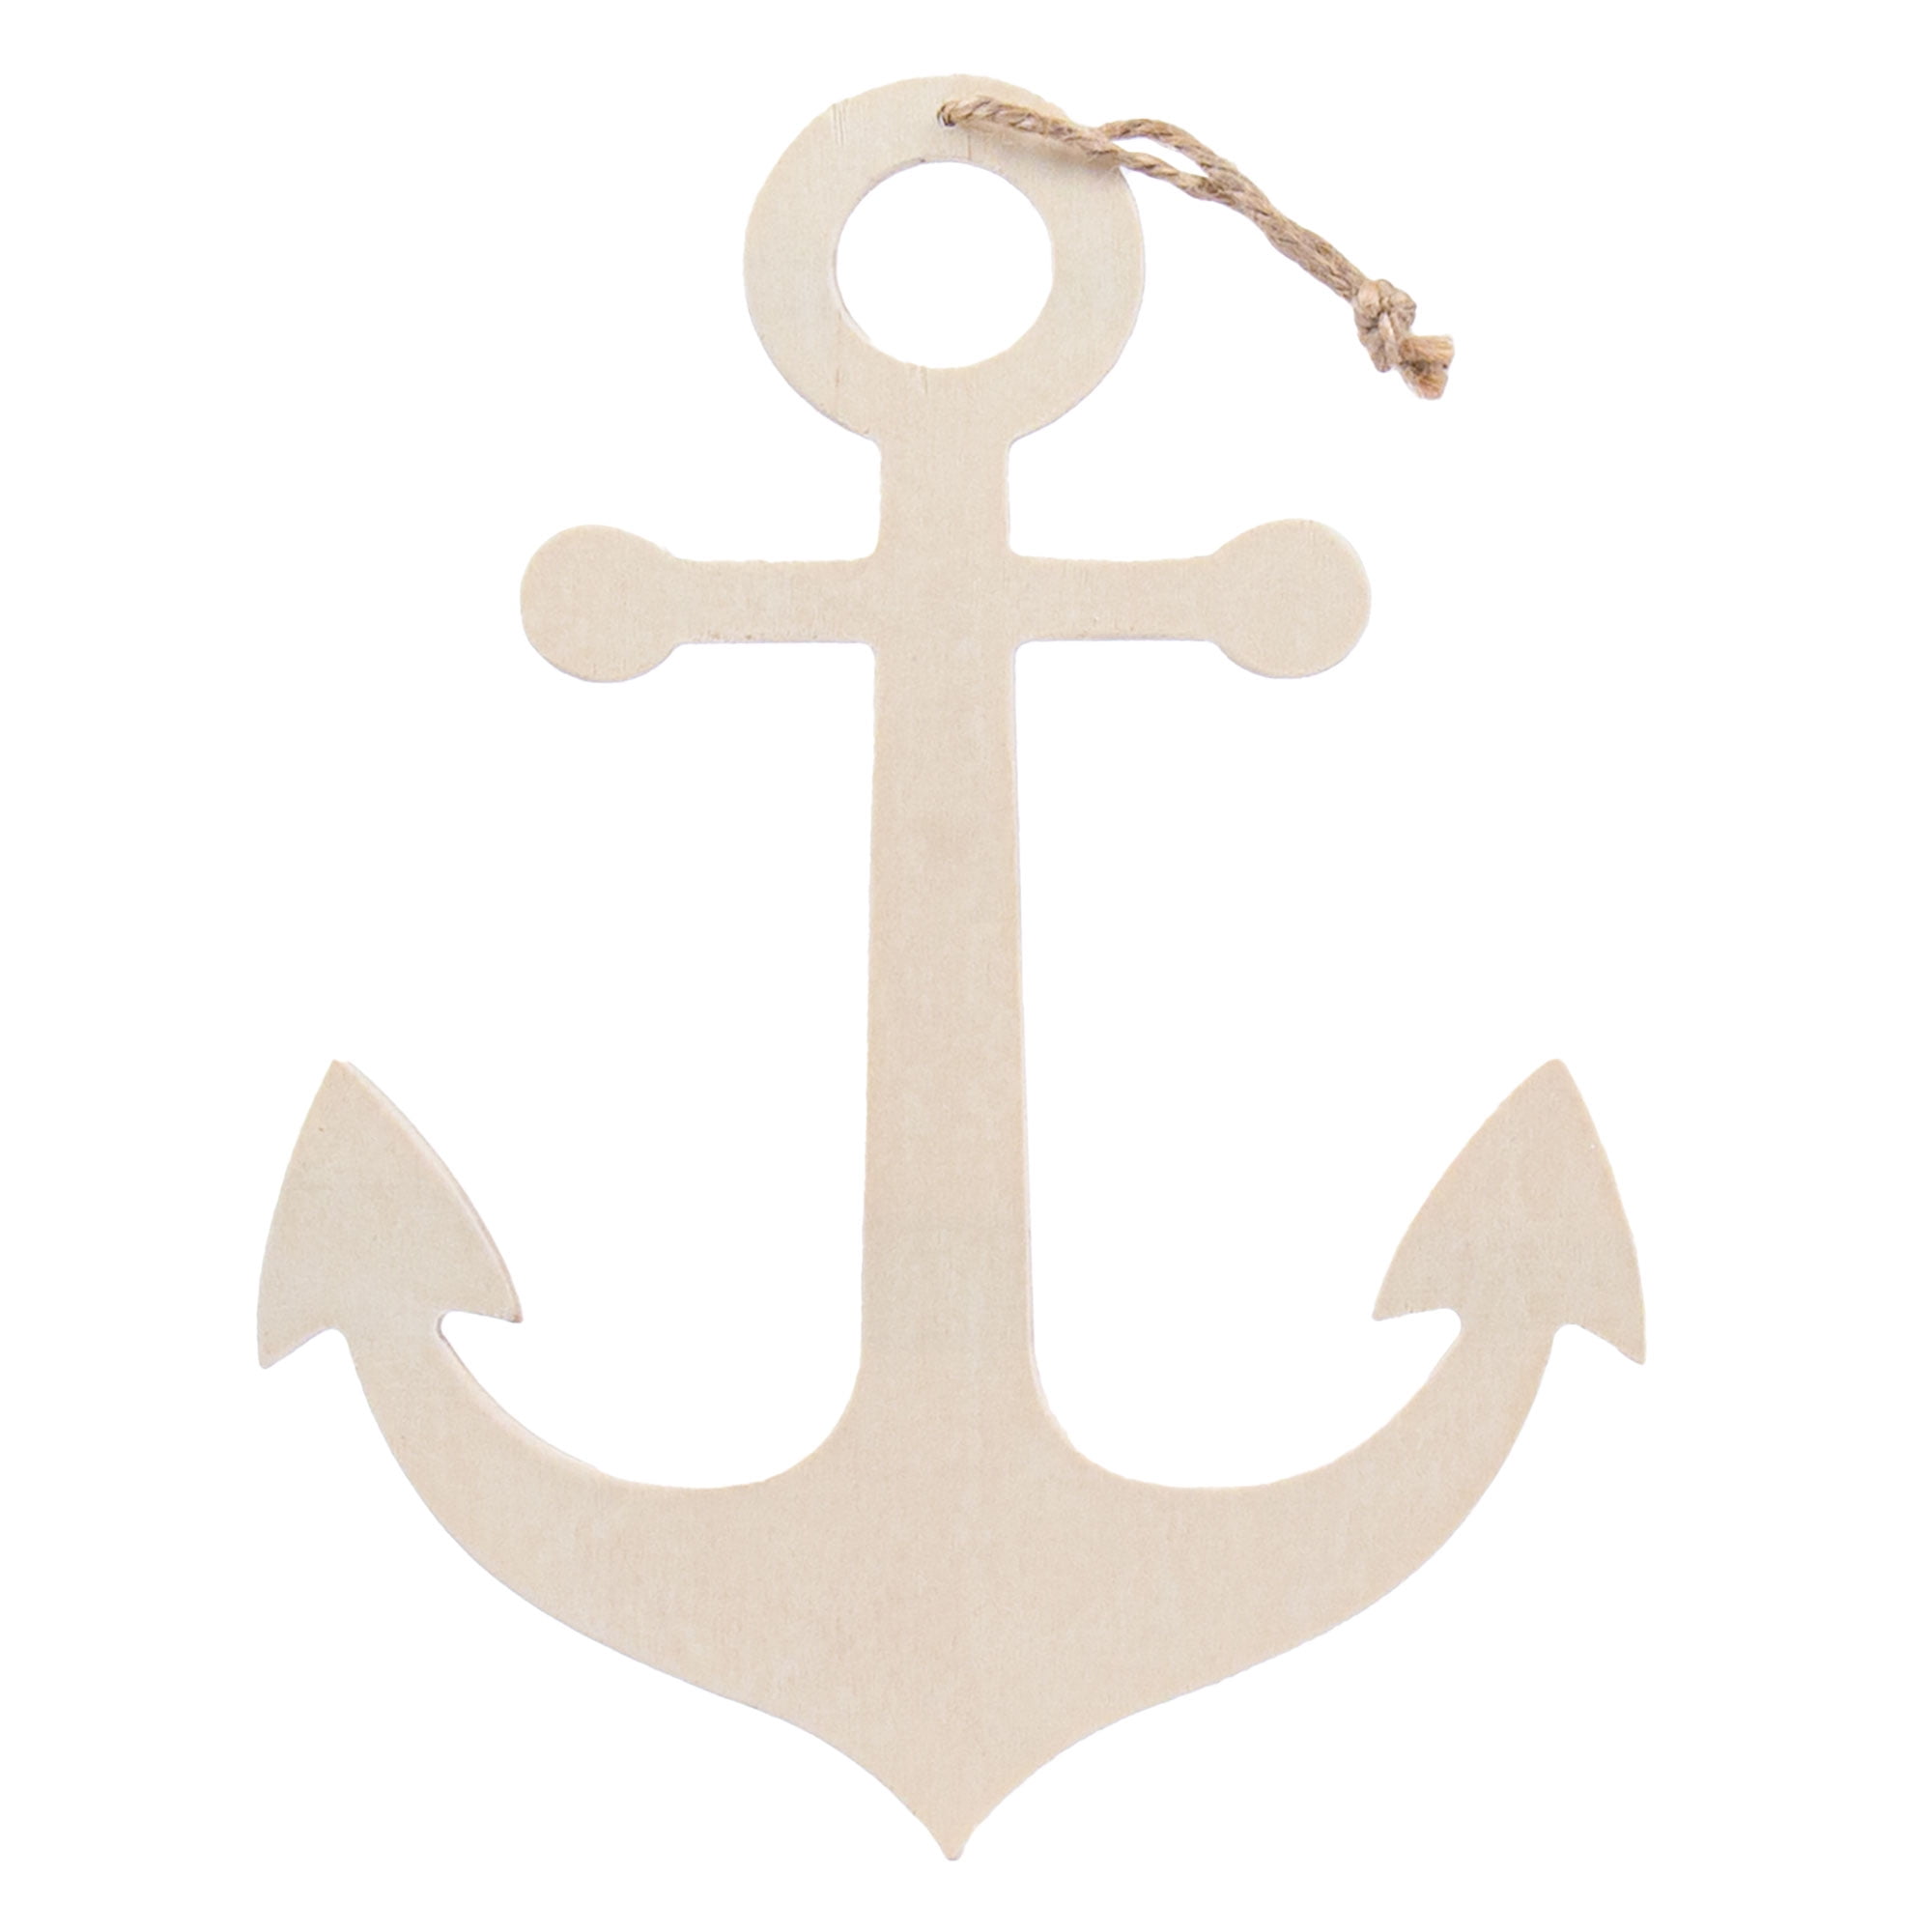 On The Surface Brown Wooden Anchor Shape, Wood Anchor Cutout Dcor